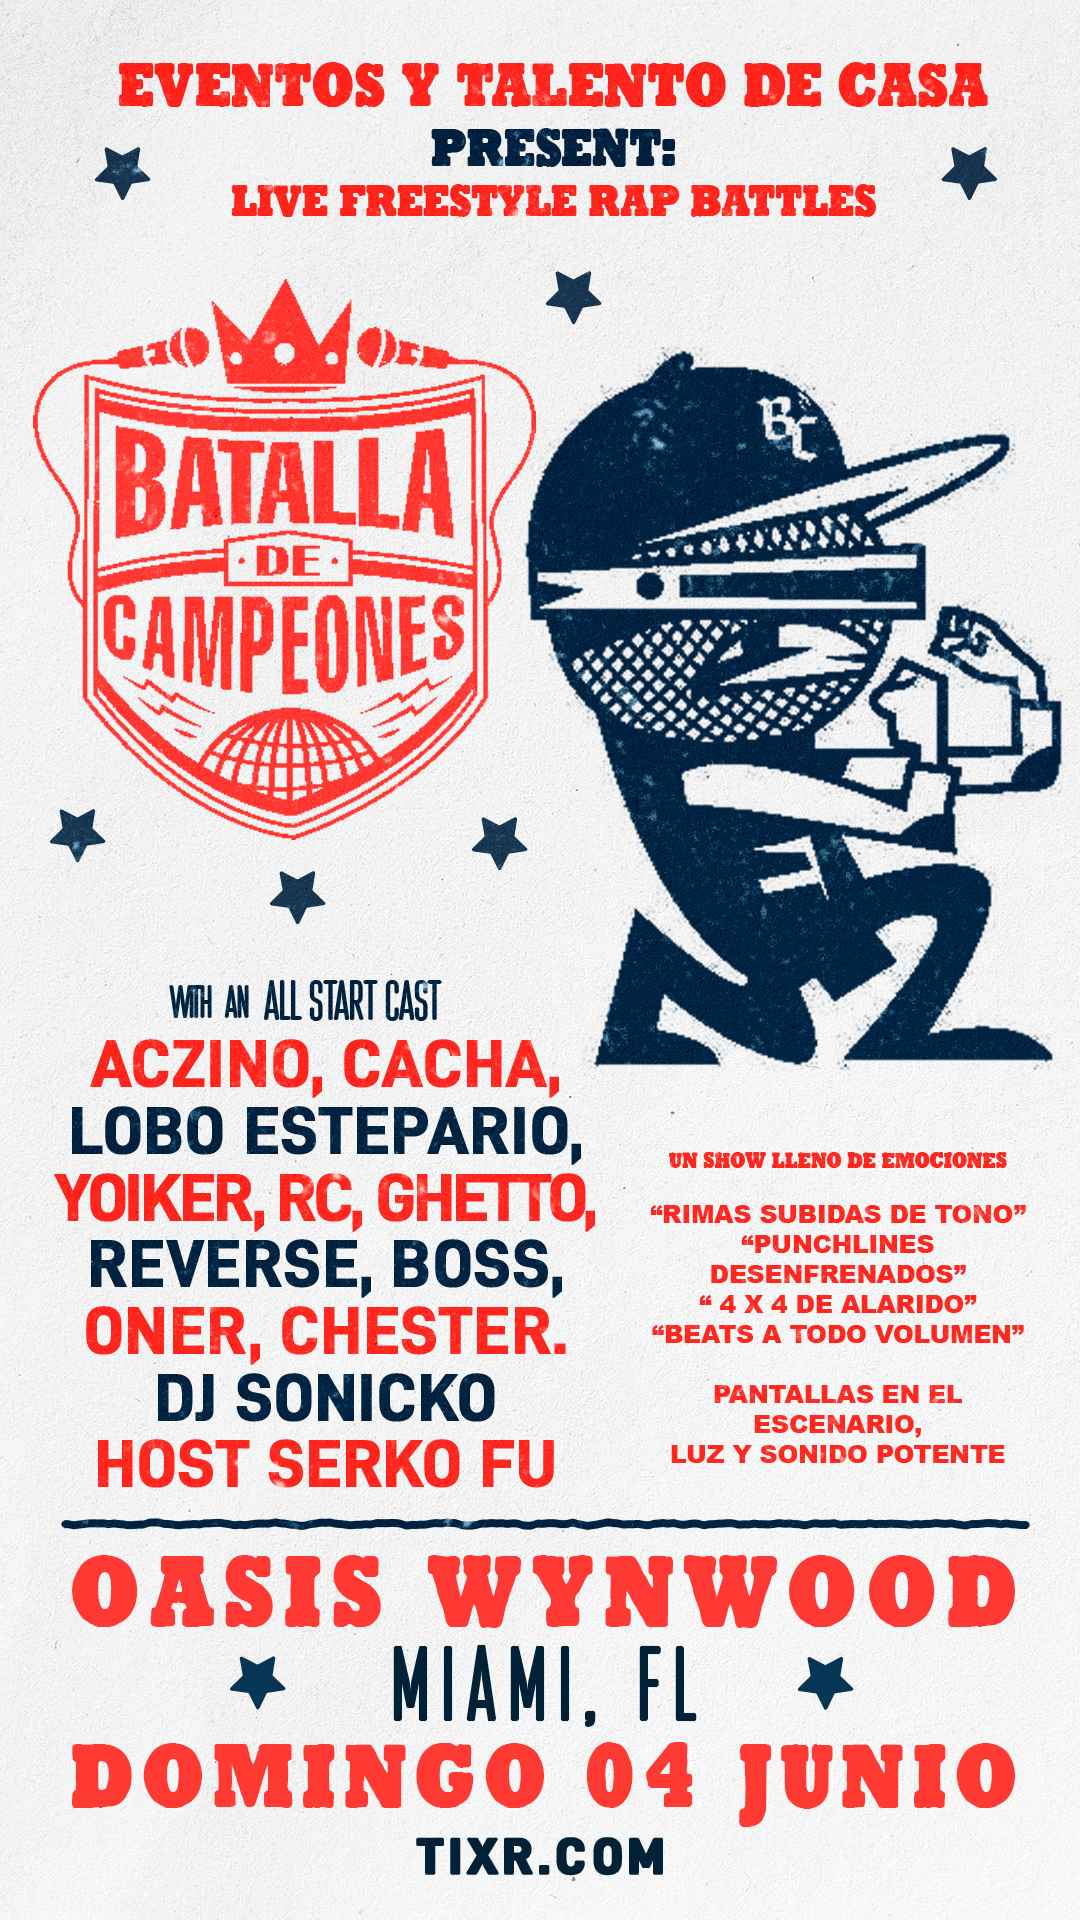 Batalla de Campeones US Tour Tickets at Oasis Wynwood in Miami by